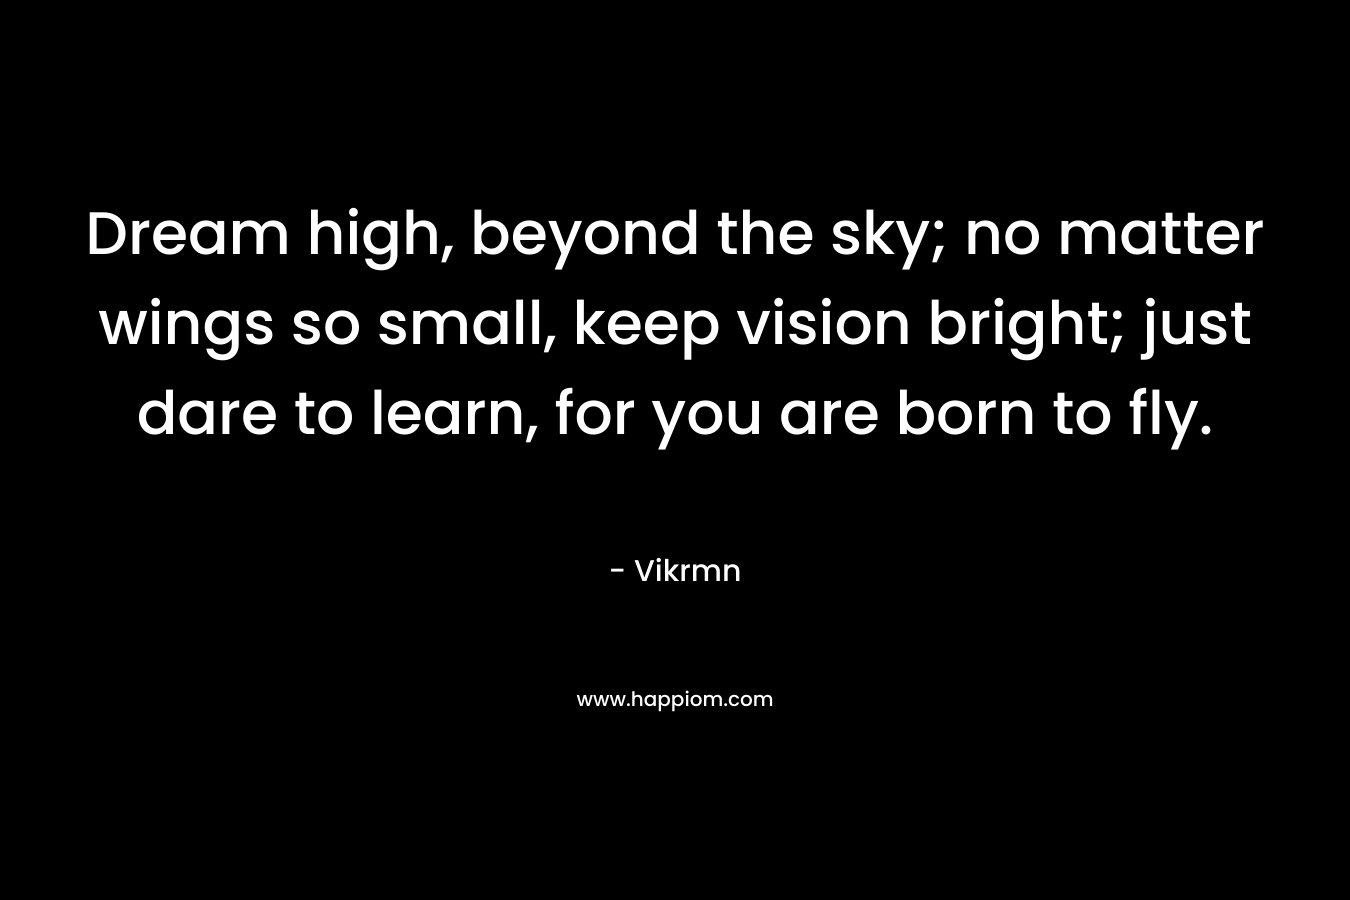 Dream high, beyond the sky; no matter wings so small, keep vision bright; just dare to learn, for you are born to fly.